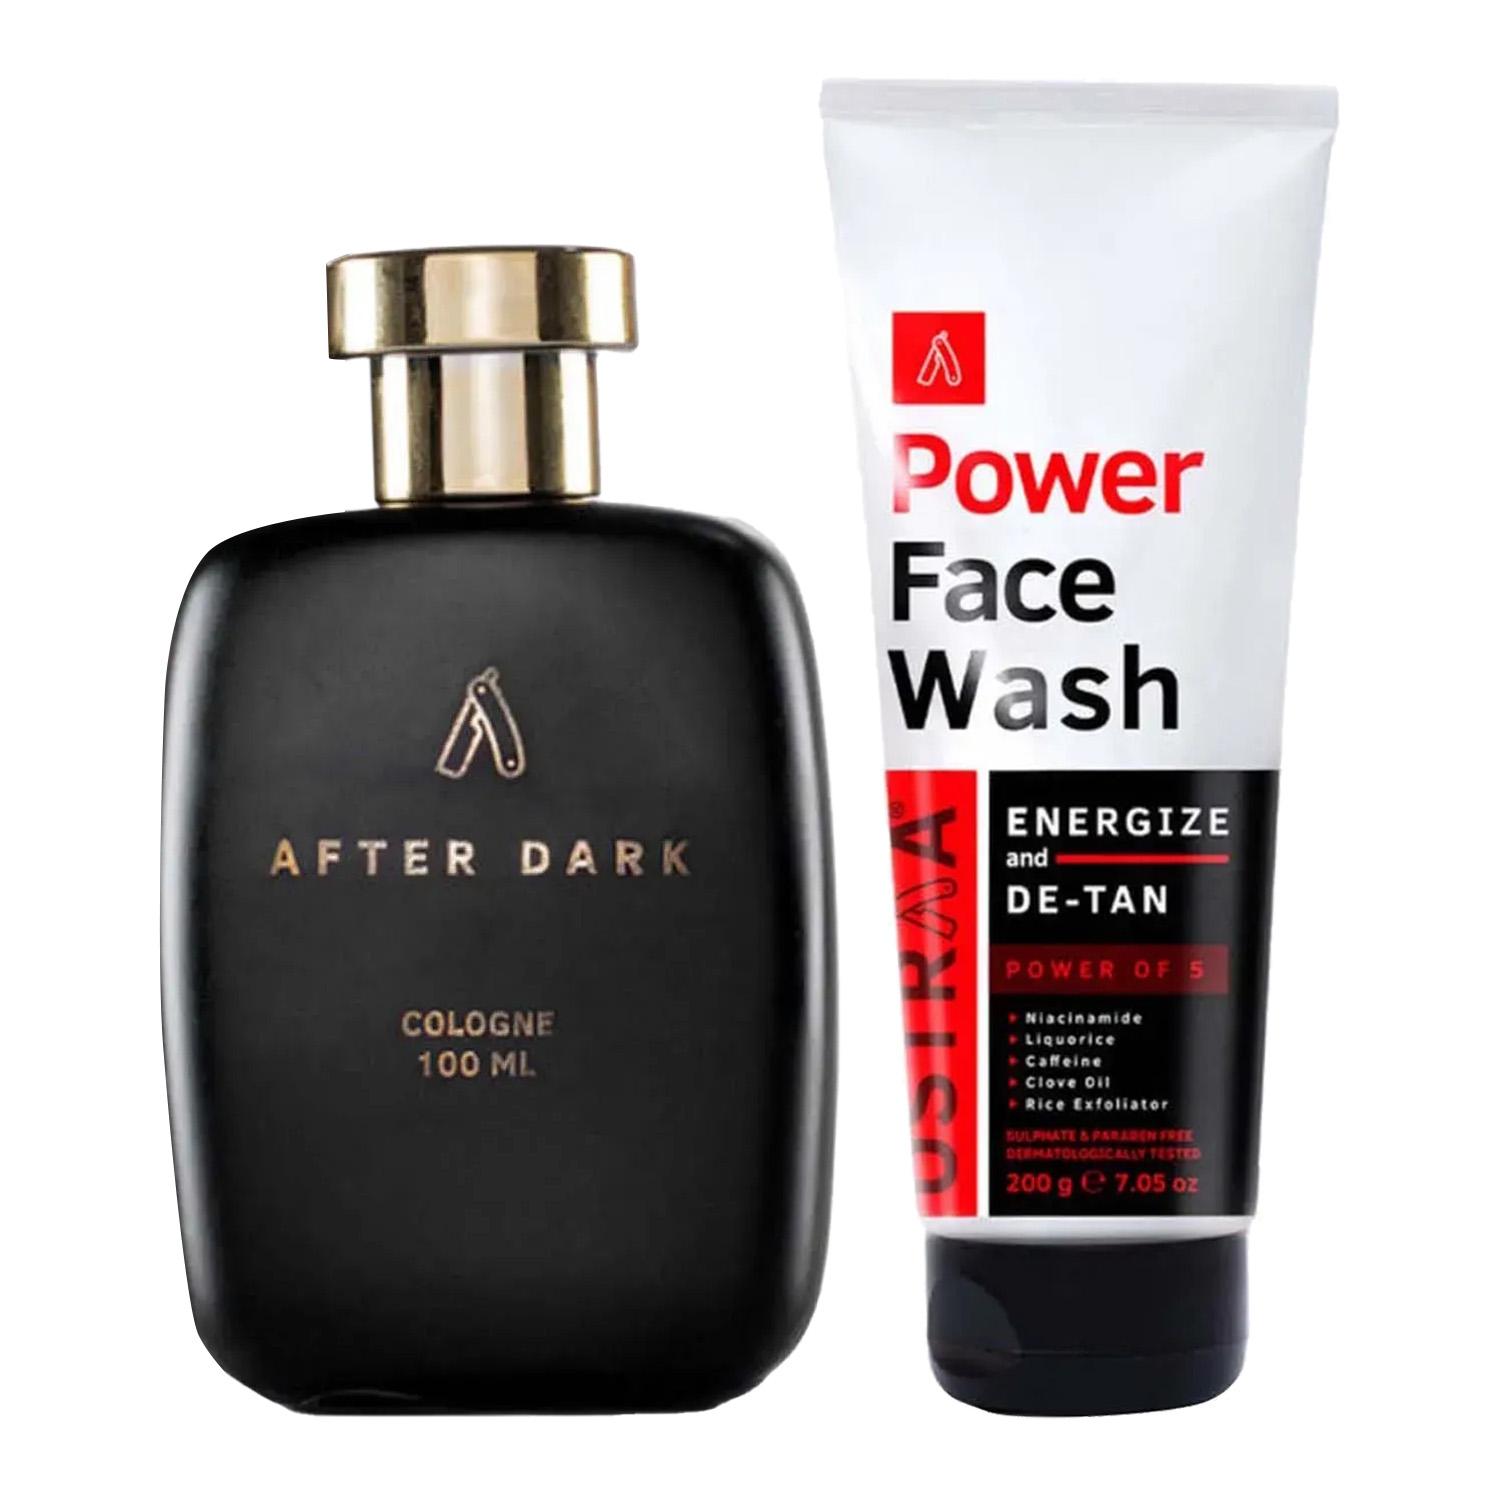 Ustraa Energize And De-Tan Power Face Wash (200 g) & Cologne For Men After Dark (100 ml) Combo